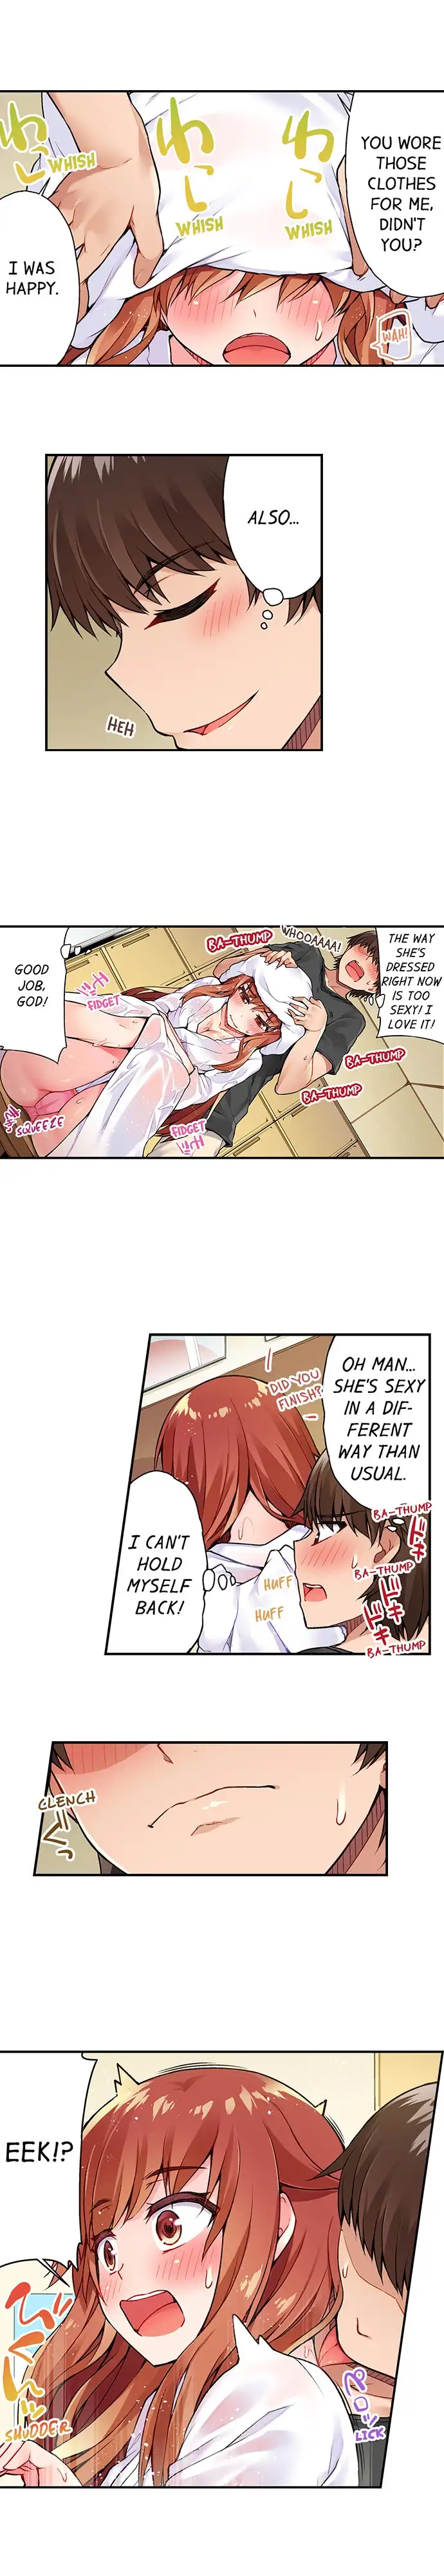 Traditional Job of Washing Girls’ Body - Chapter 34 Page 5